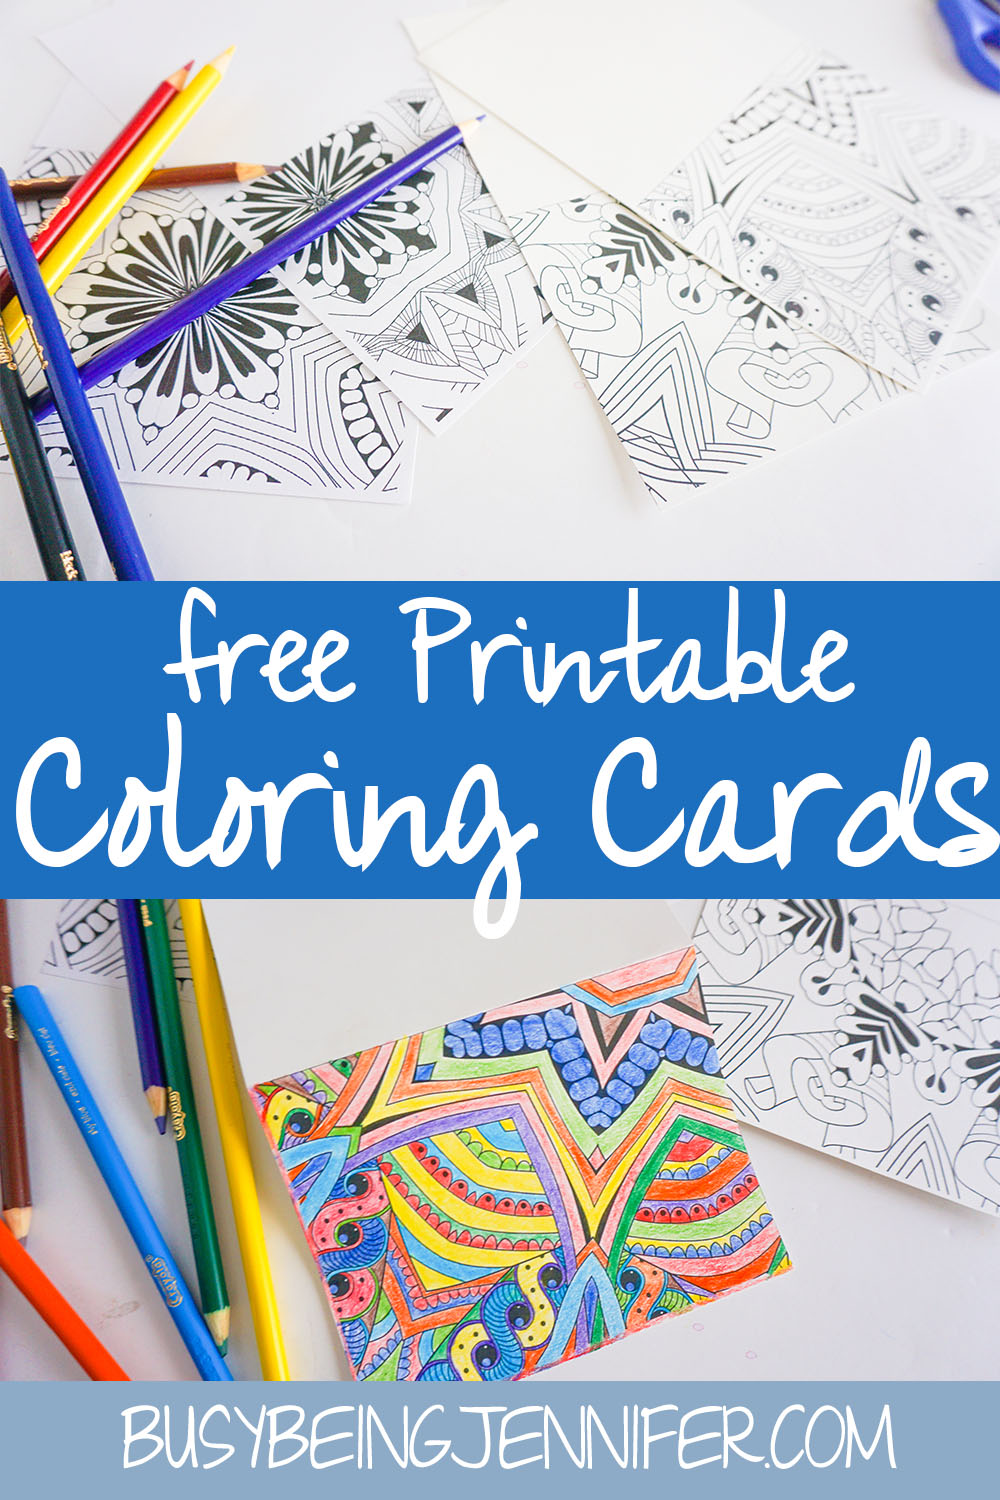 I wanted to send a card, but I wanted it to be a fun Adult Coloring Card, so I turned it into a free printable, so I could share it with you too!